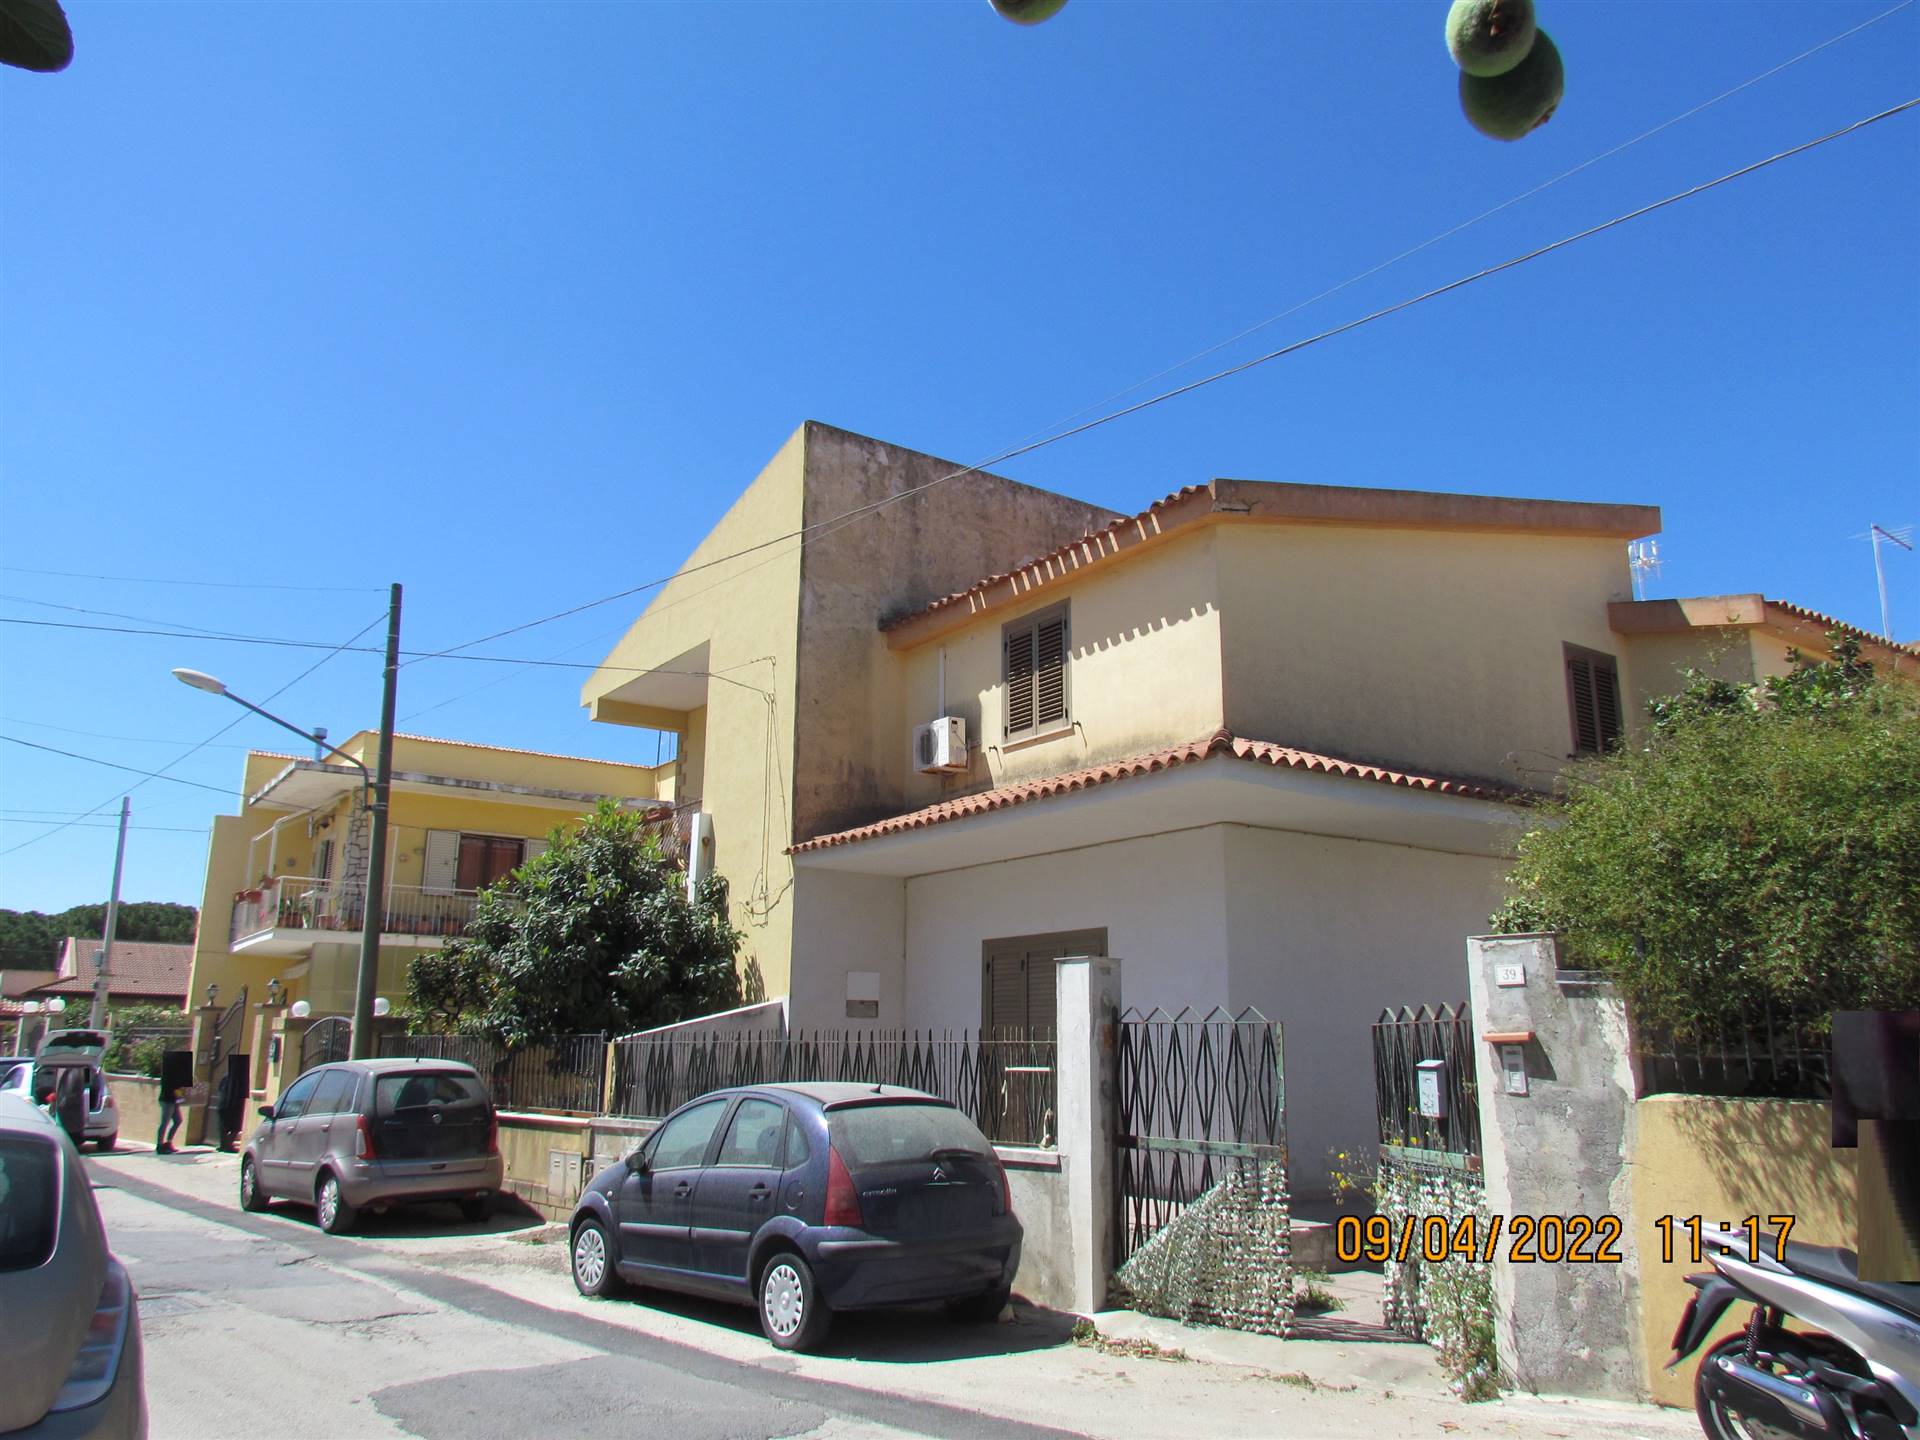 We have a 178 sqm independent apartment, on the ground floor consisting of: entrance hall on the living room, one bedroom, kitchen, bathroom and 